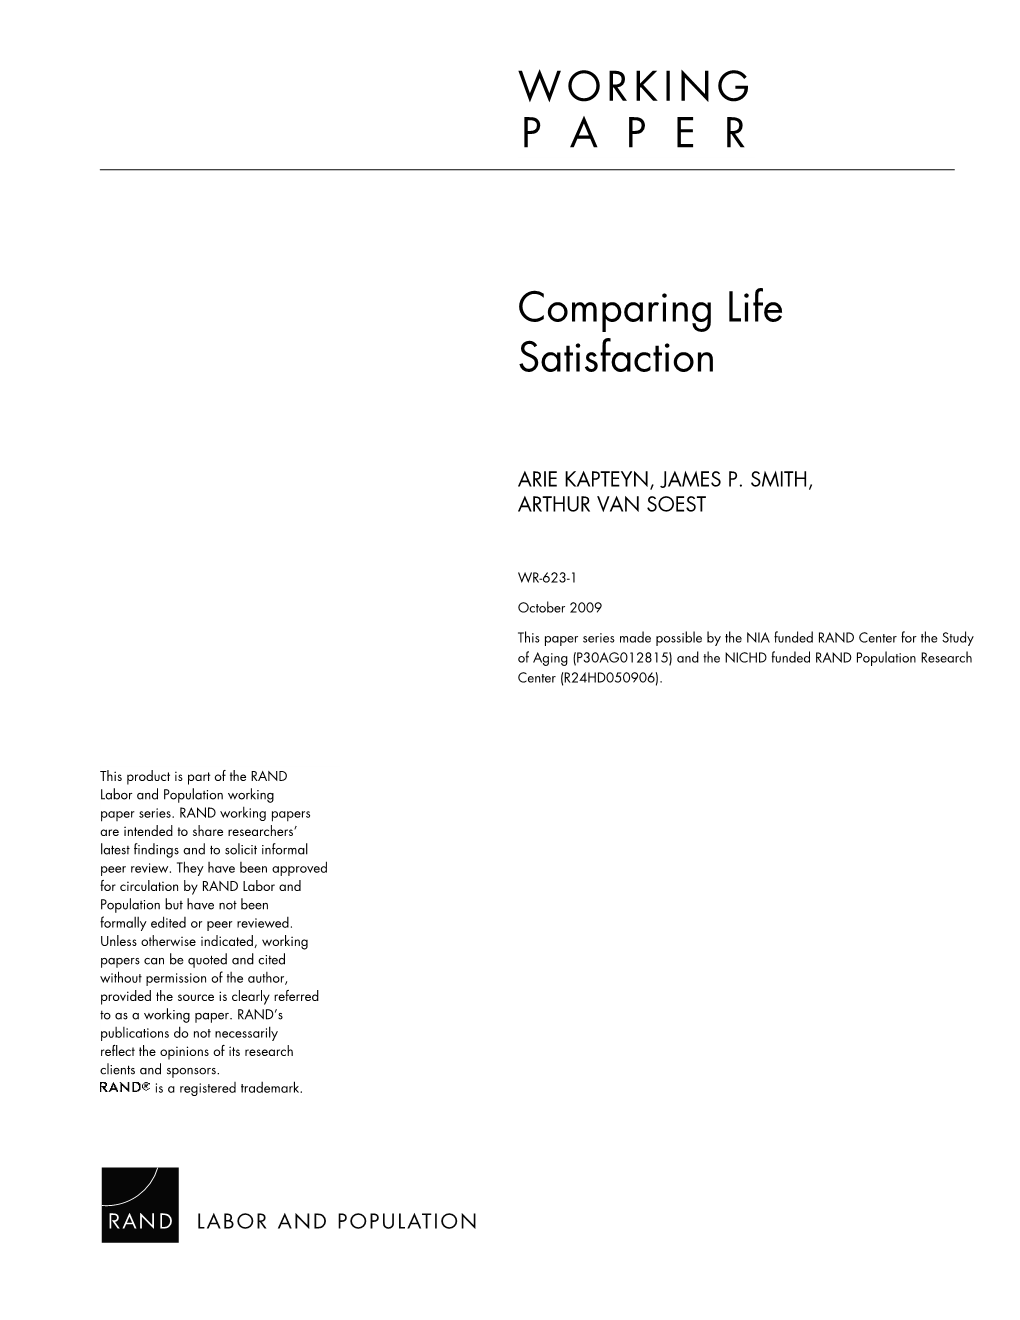 Comparing Life Satisfaction